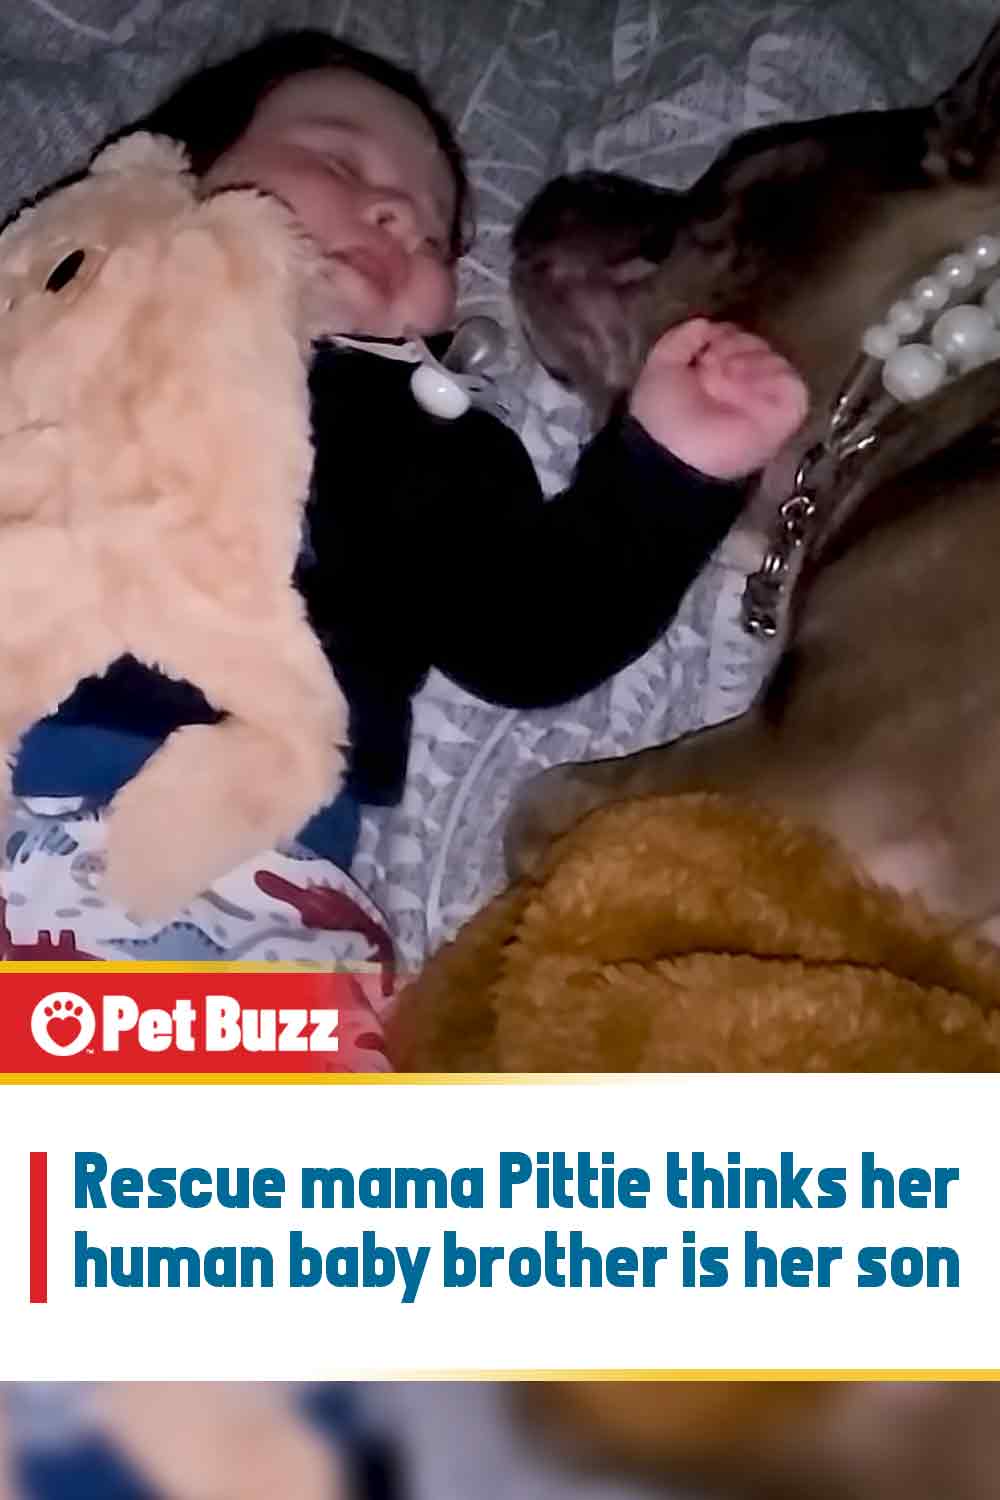 Rescue mama Pittie thinks her human baby brother is her son